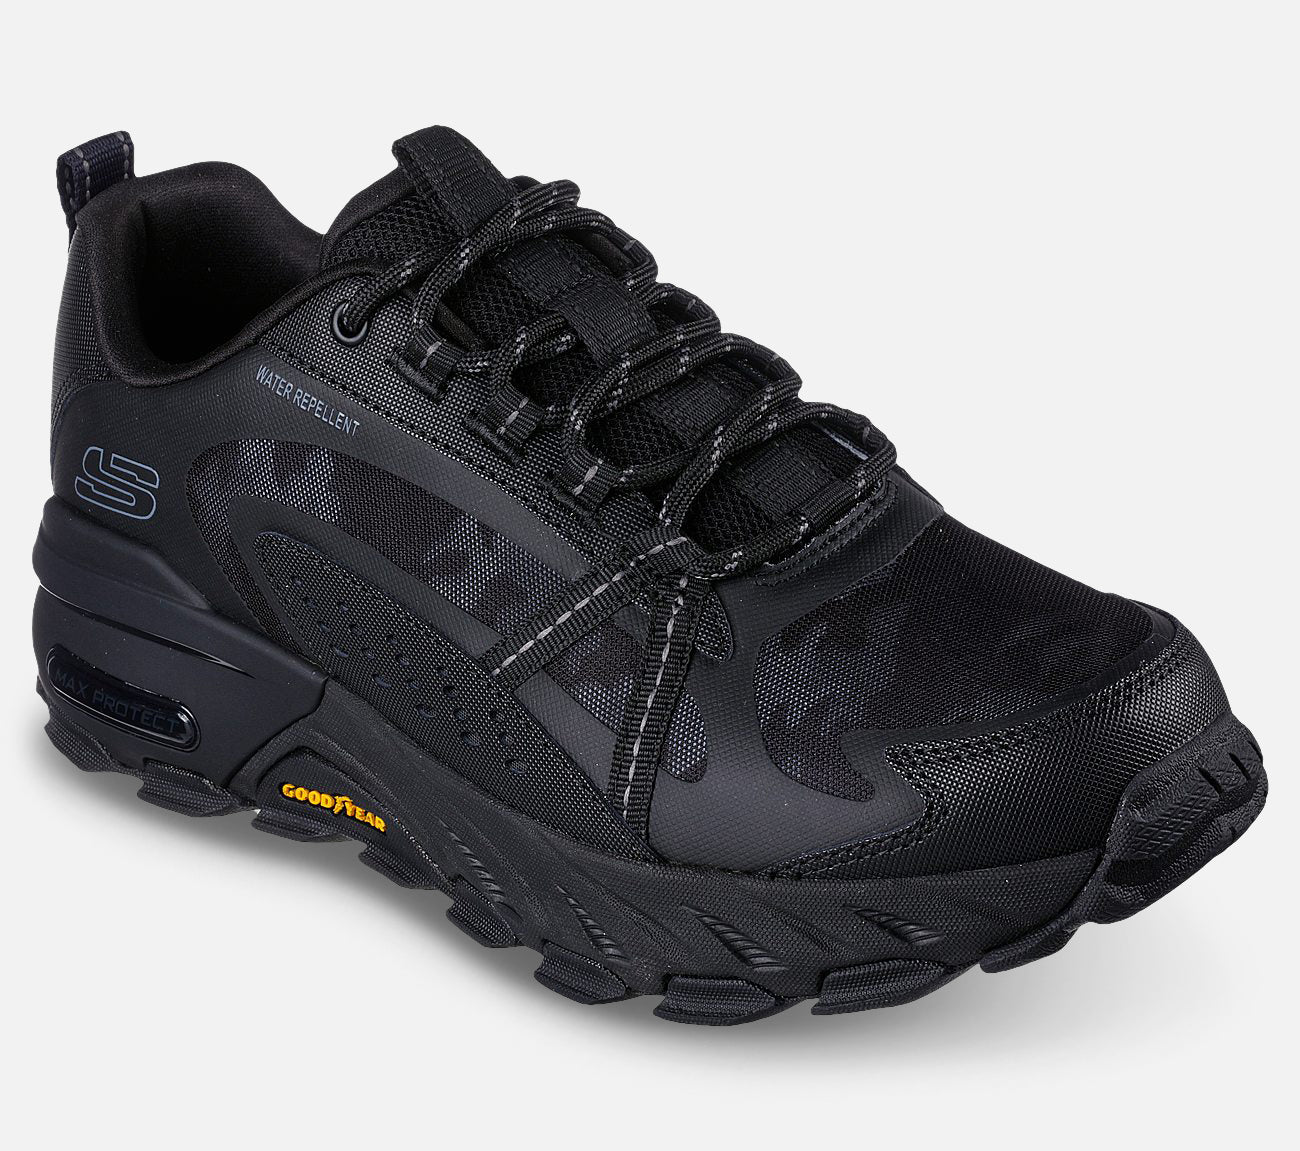 Max Protect - Task Force - Water Repellent Shoe Skechers